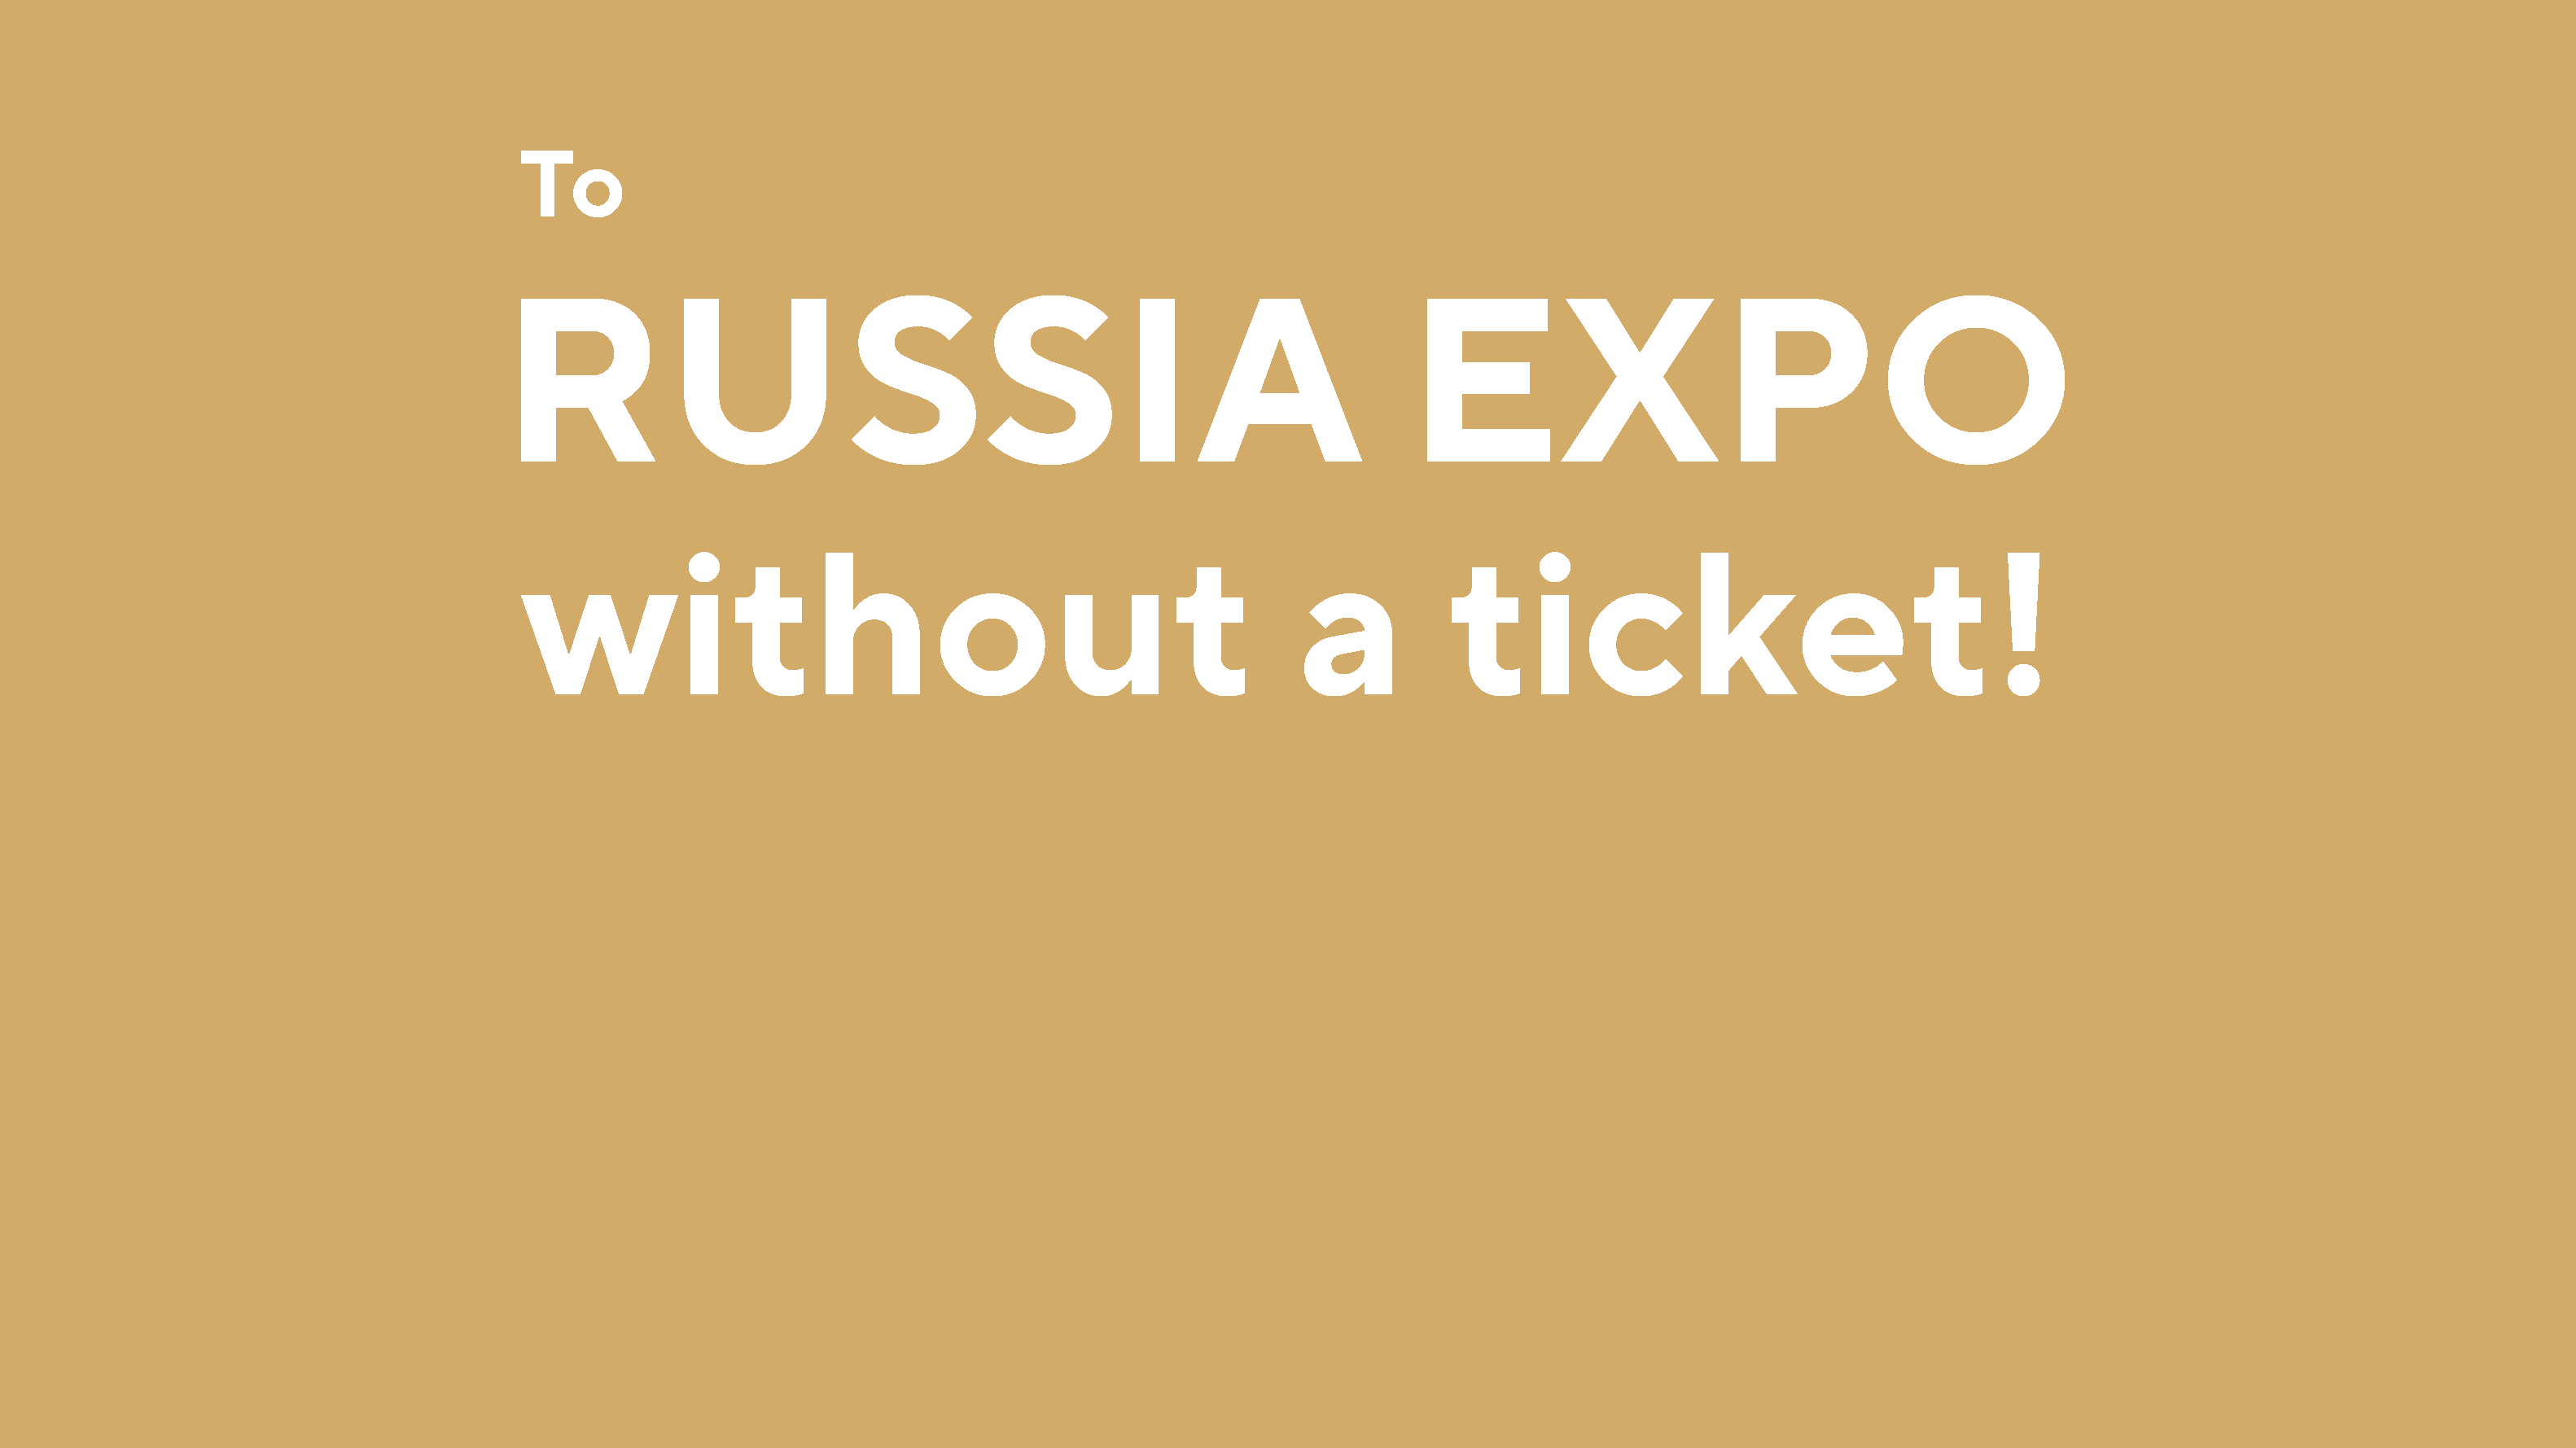 Visiting the RUSSIA EXPO and all its expositions is free for everyone!